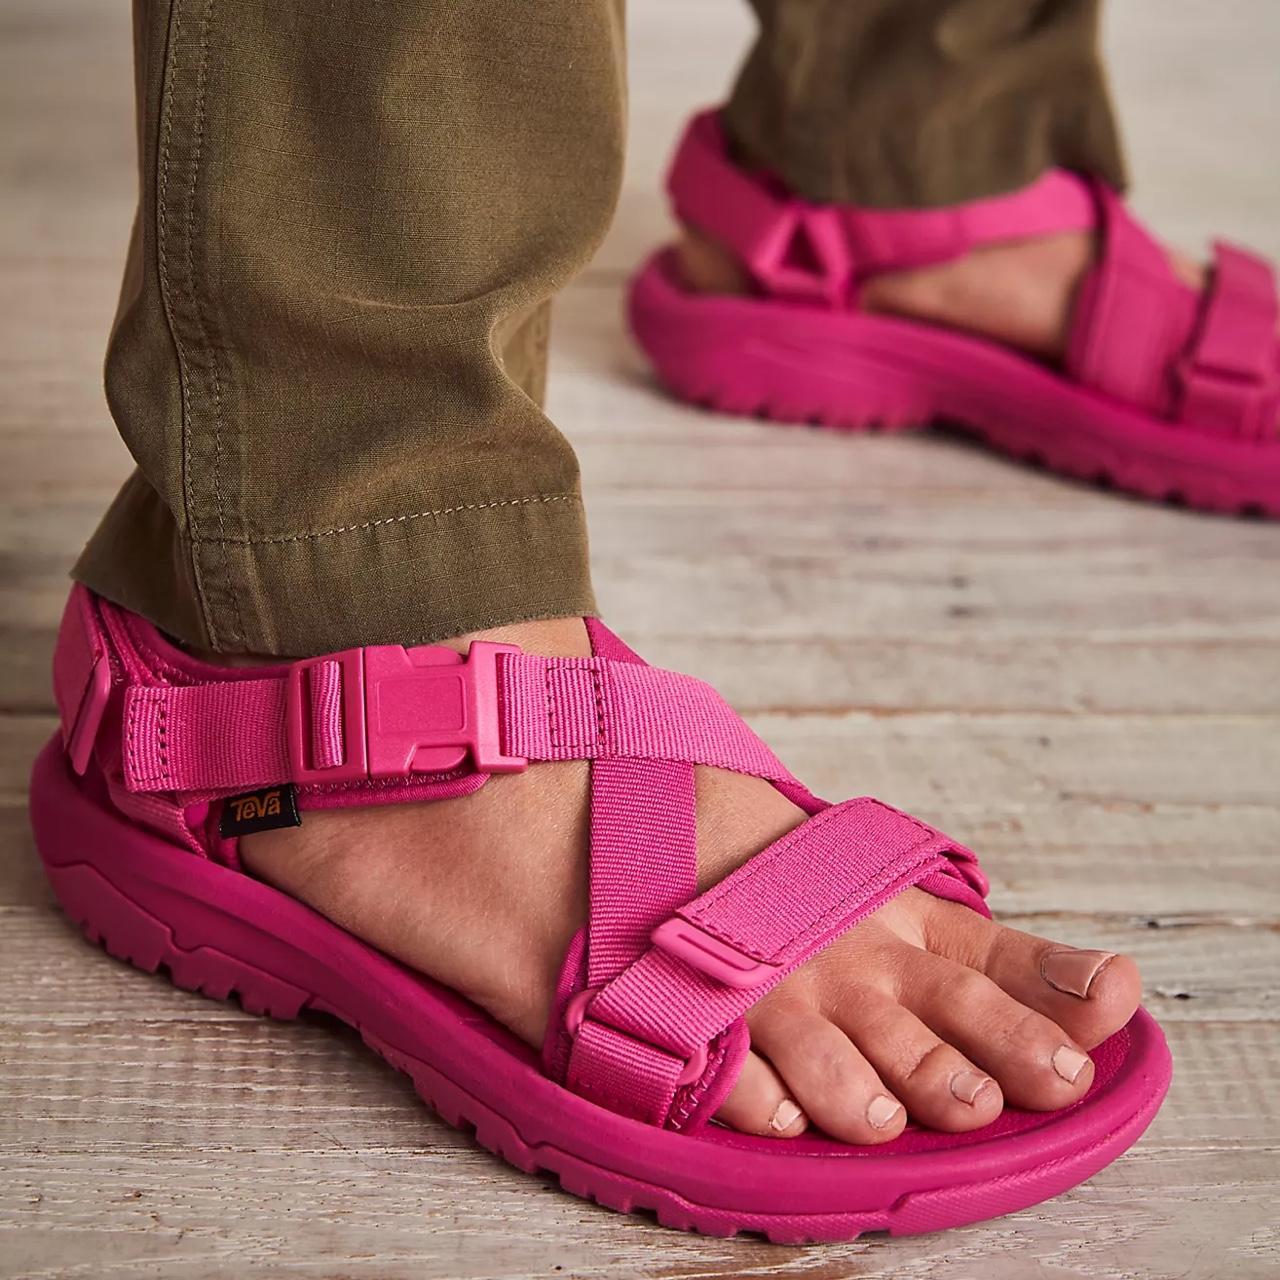 Teva's recycling service gives new life to used sandals | YnFx